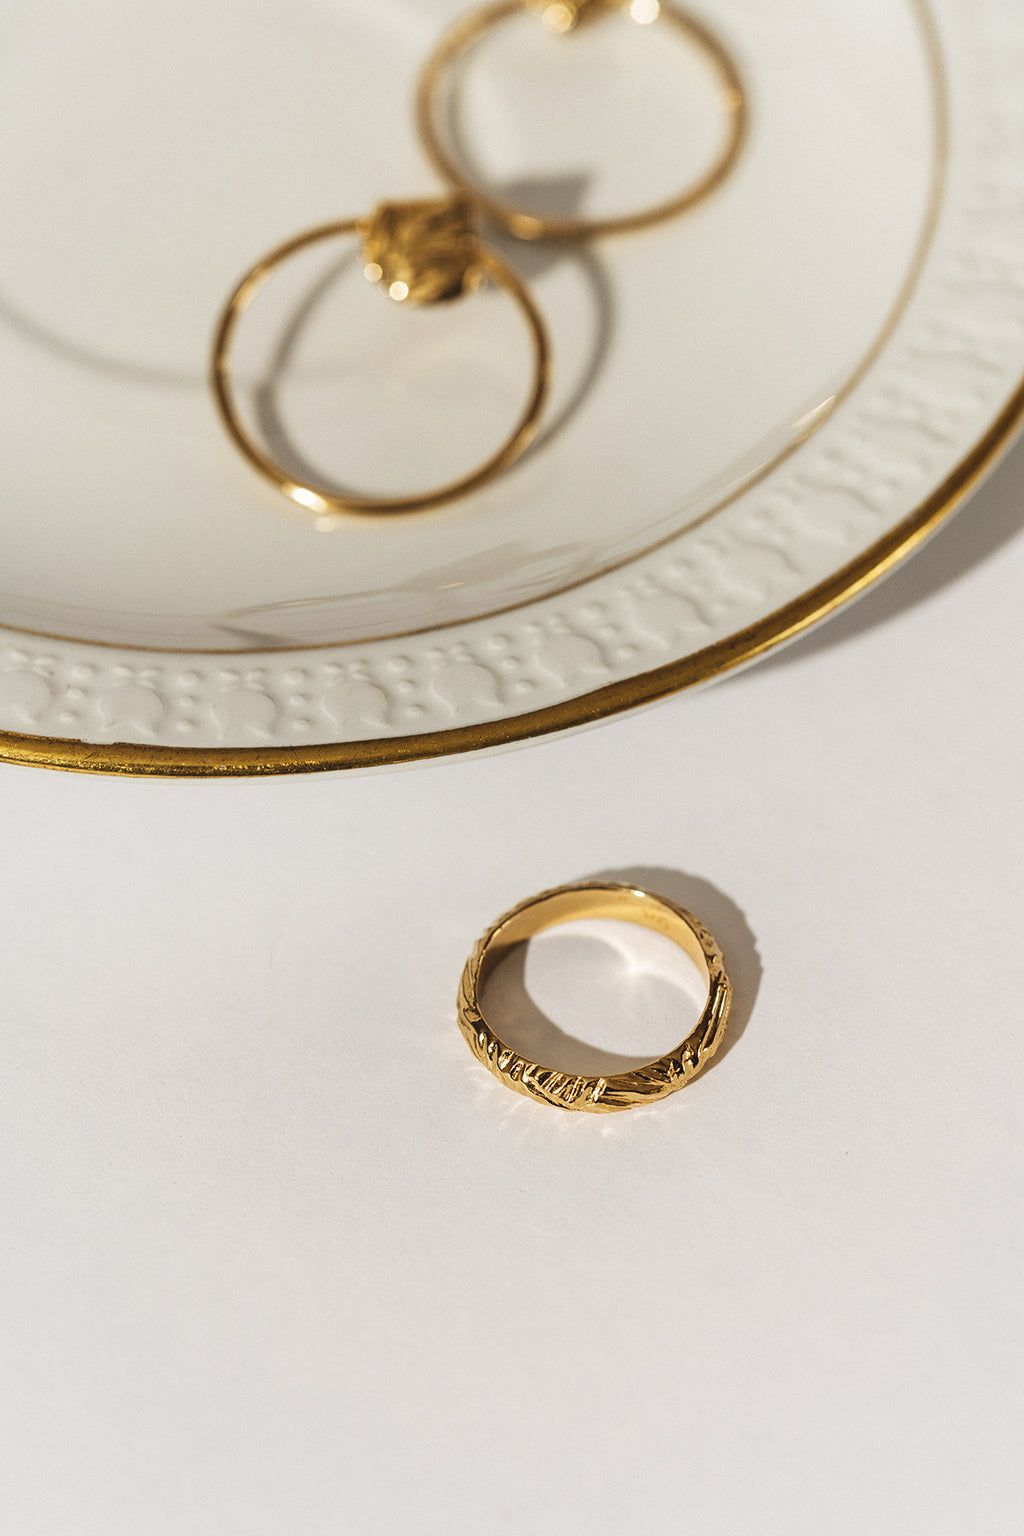 How to clean and care for gold plated jewelry